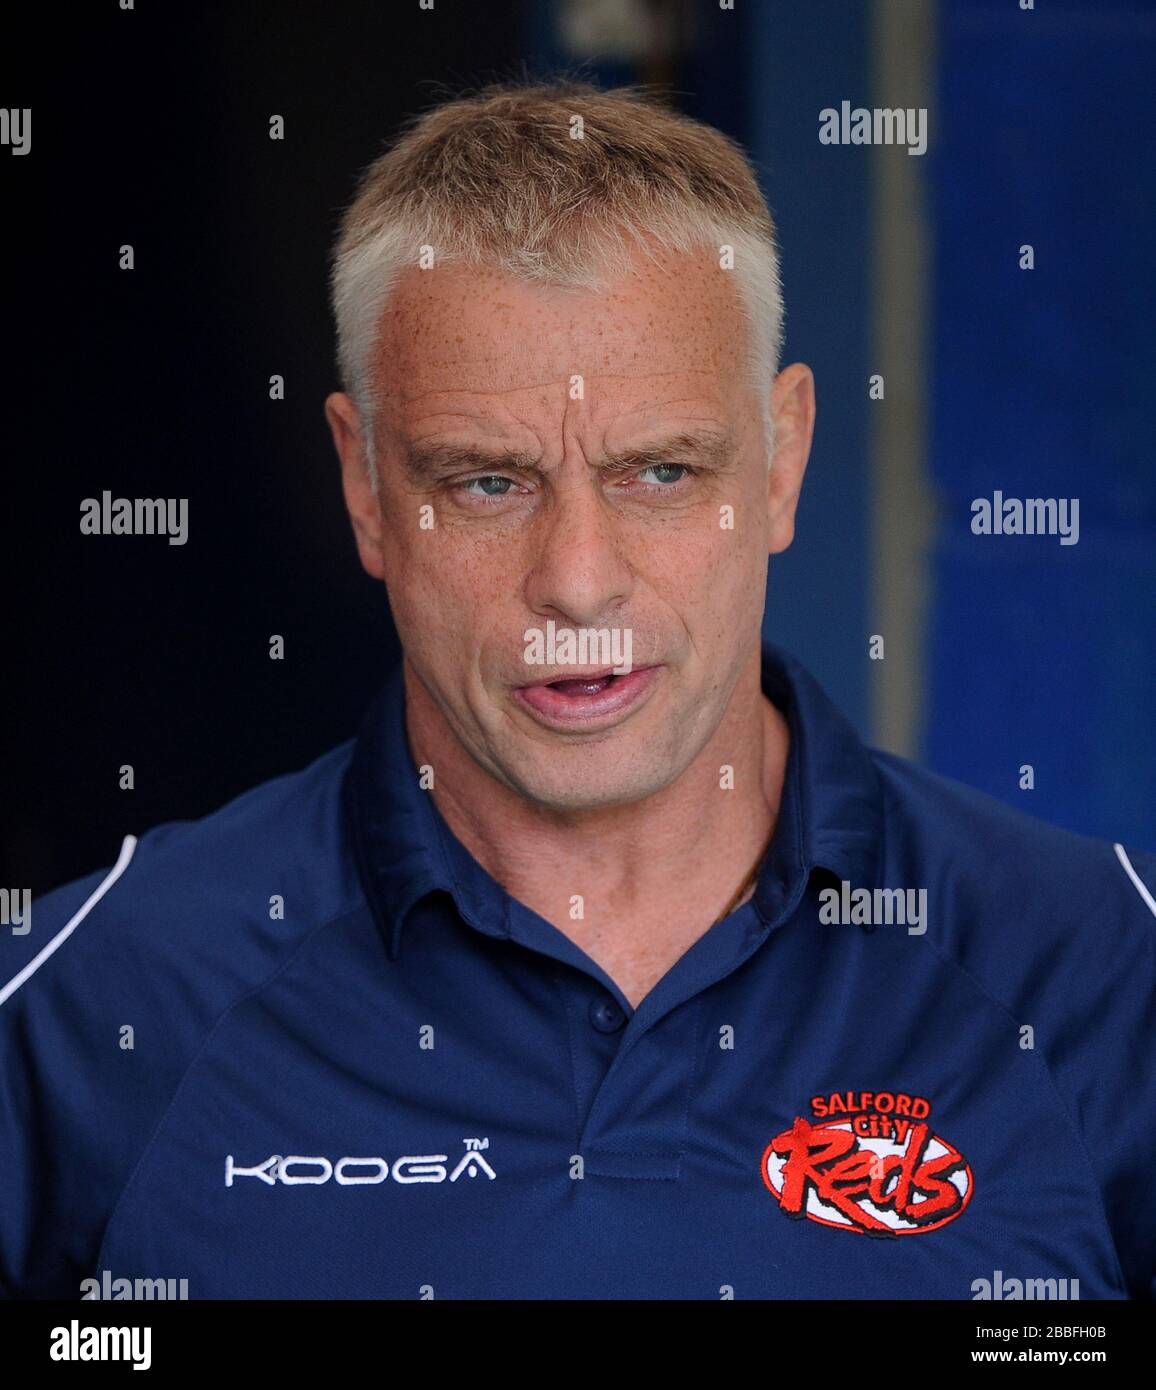 Salford City Reds' Head Coach Brian Noble before the game against Warrington Wolves' Stock Photo